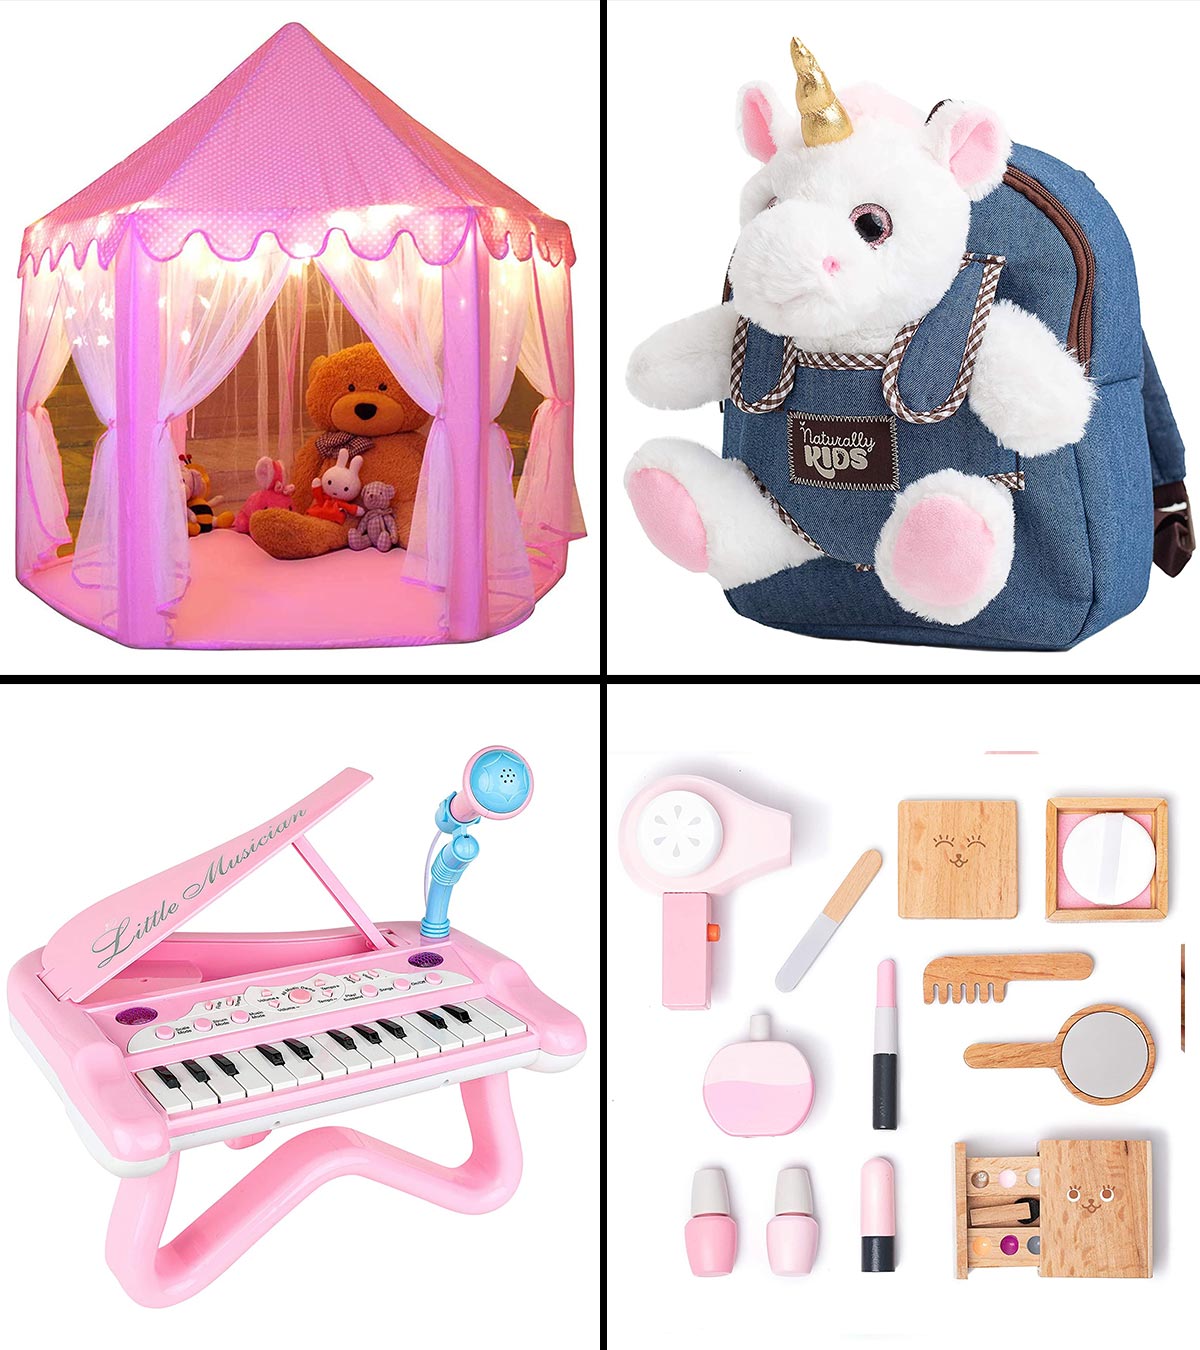 5 Fantastic Toy Gift Ideas for 7-year-old Girls in 2021